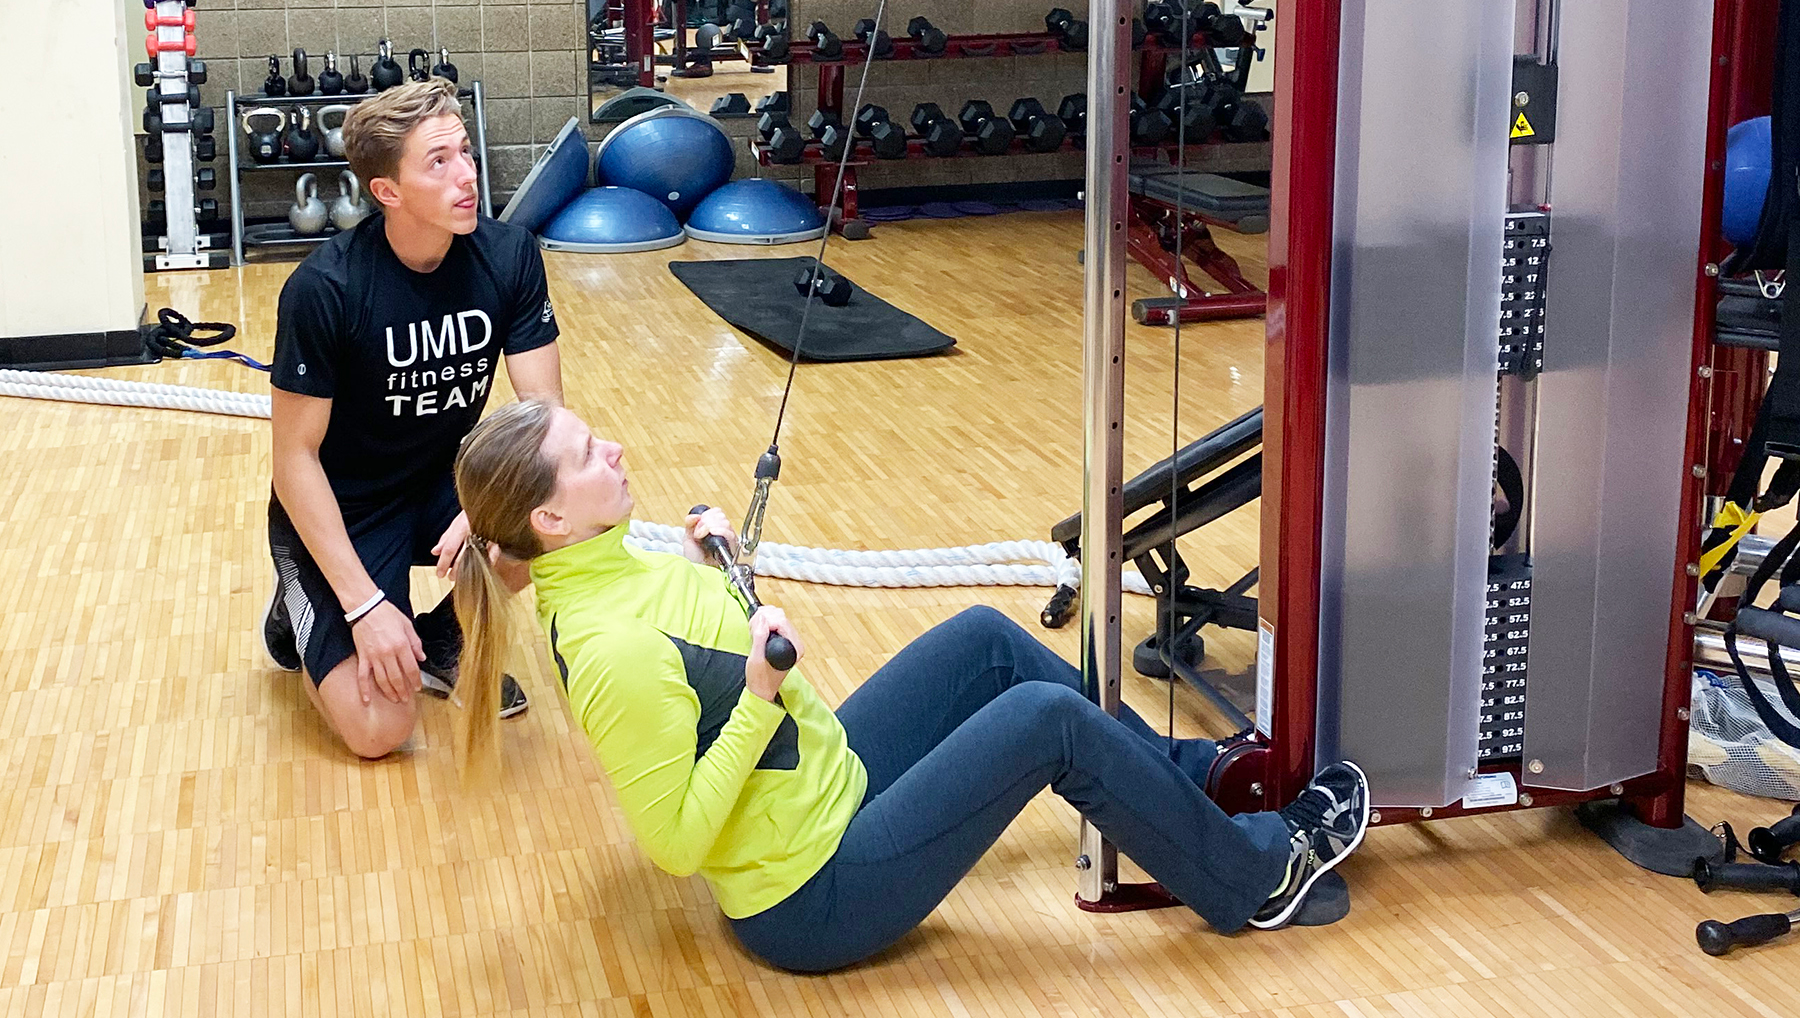 Personal Training Evanston  TruFit - Fun, supportive, approachable fitness  in Downtown Evanston!